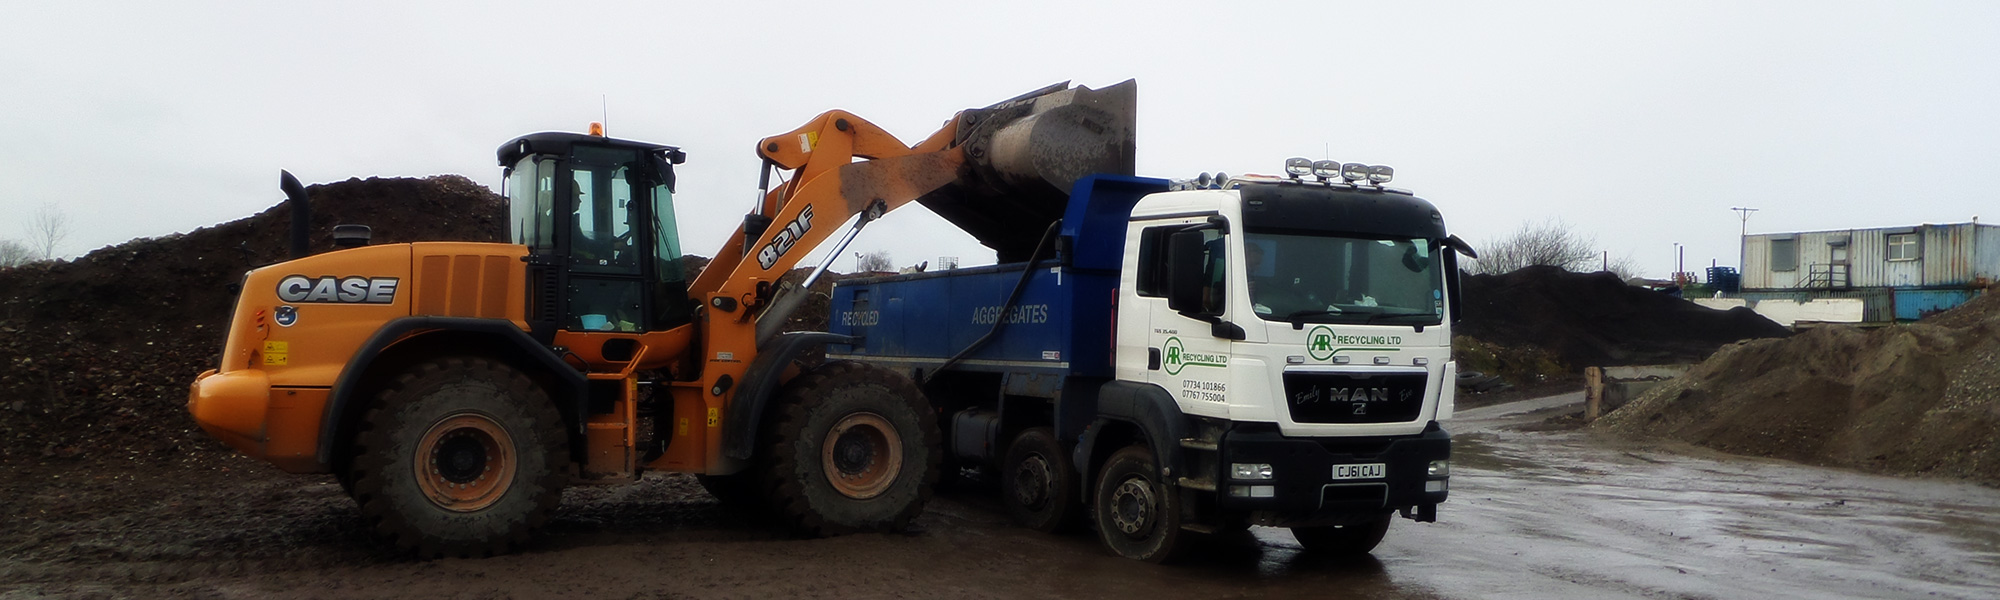 Digger loading a lorry.